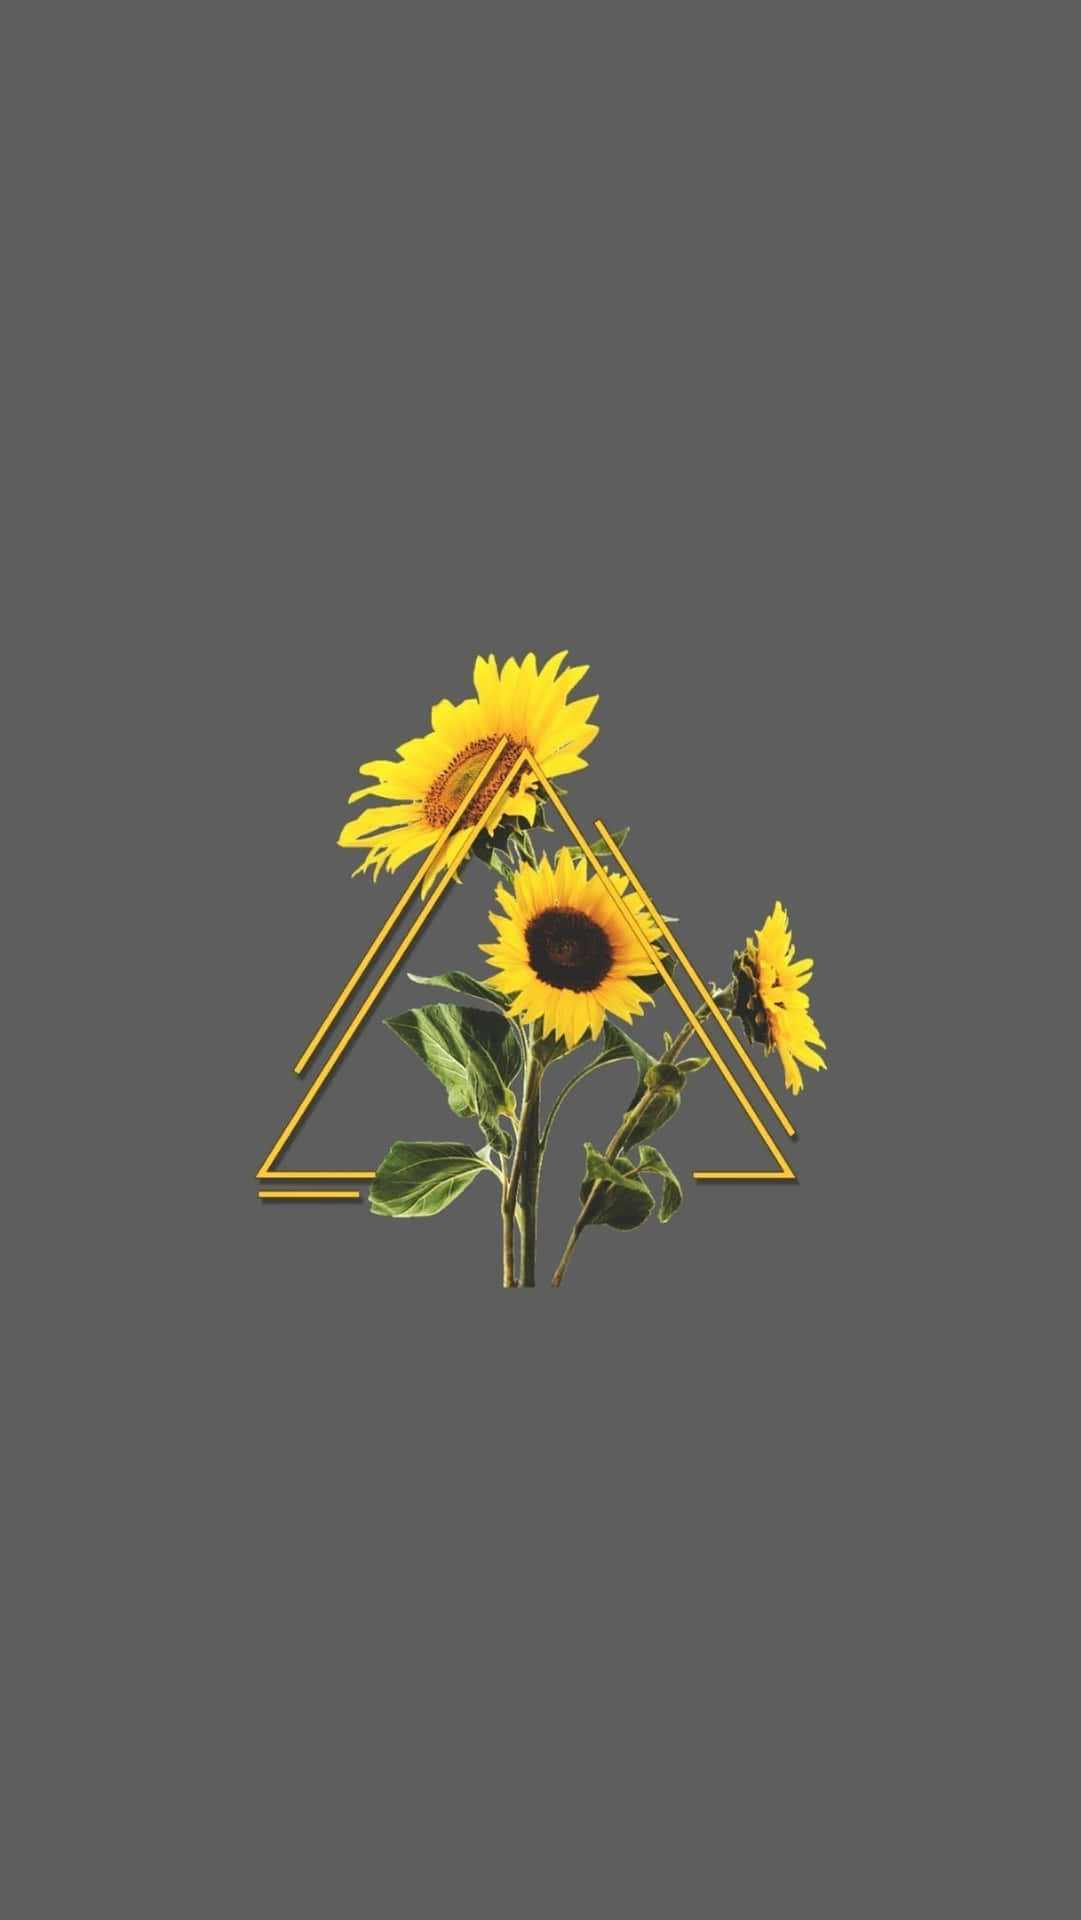 1080x1920 Common Sunflower Wallpapers for IPhone 6S /7 /8 [Retina HD]